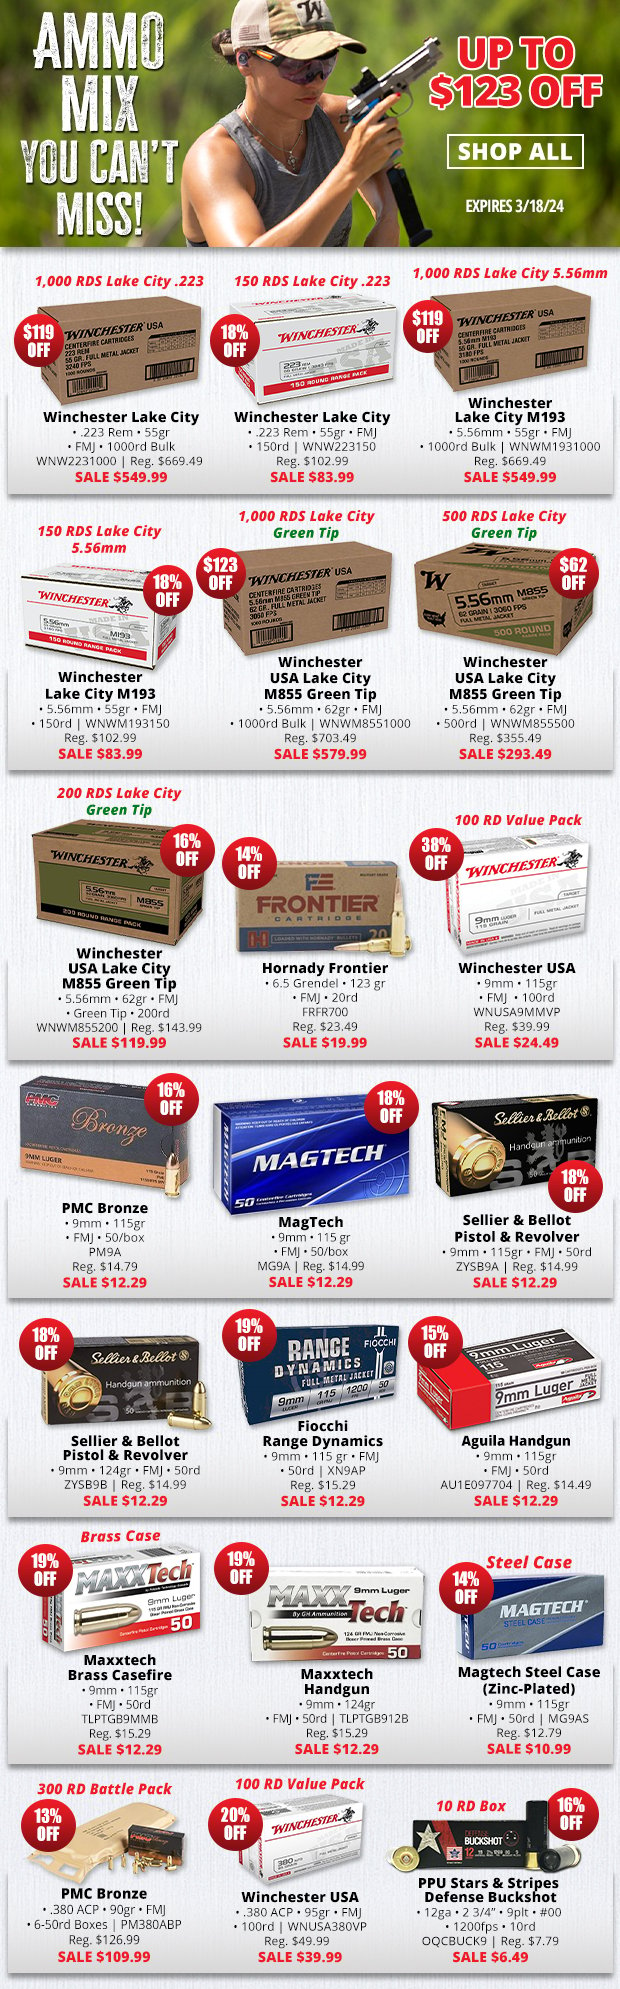 Up to $123 off on an Ammo Mix You Cant Miss!